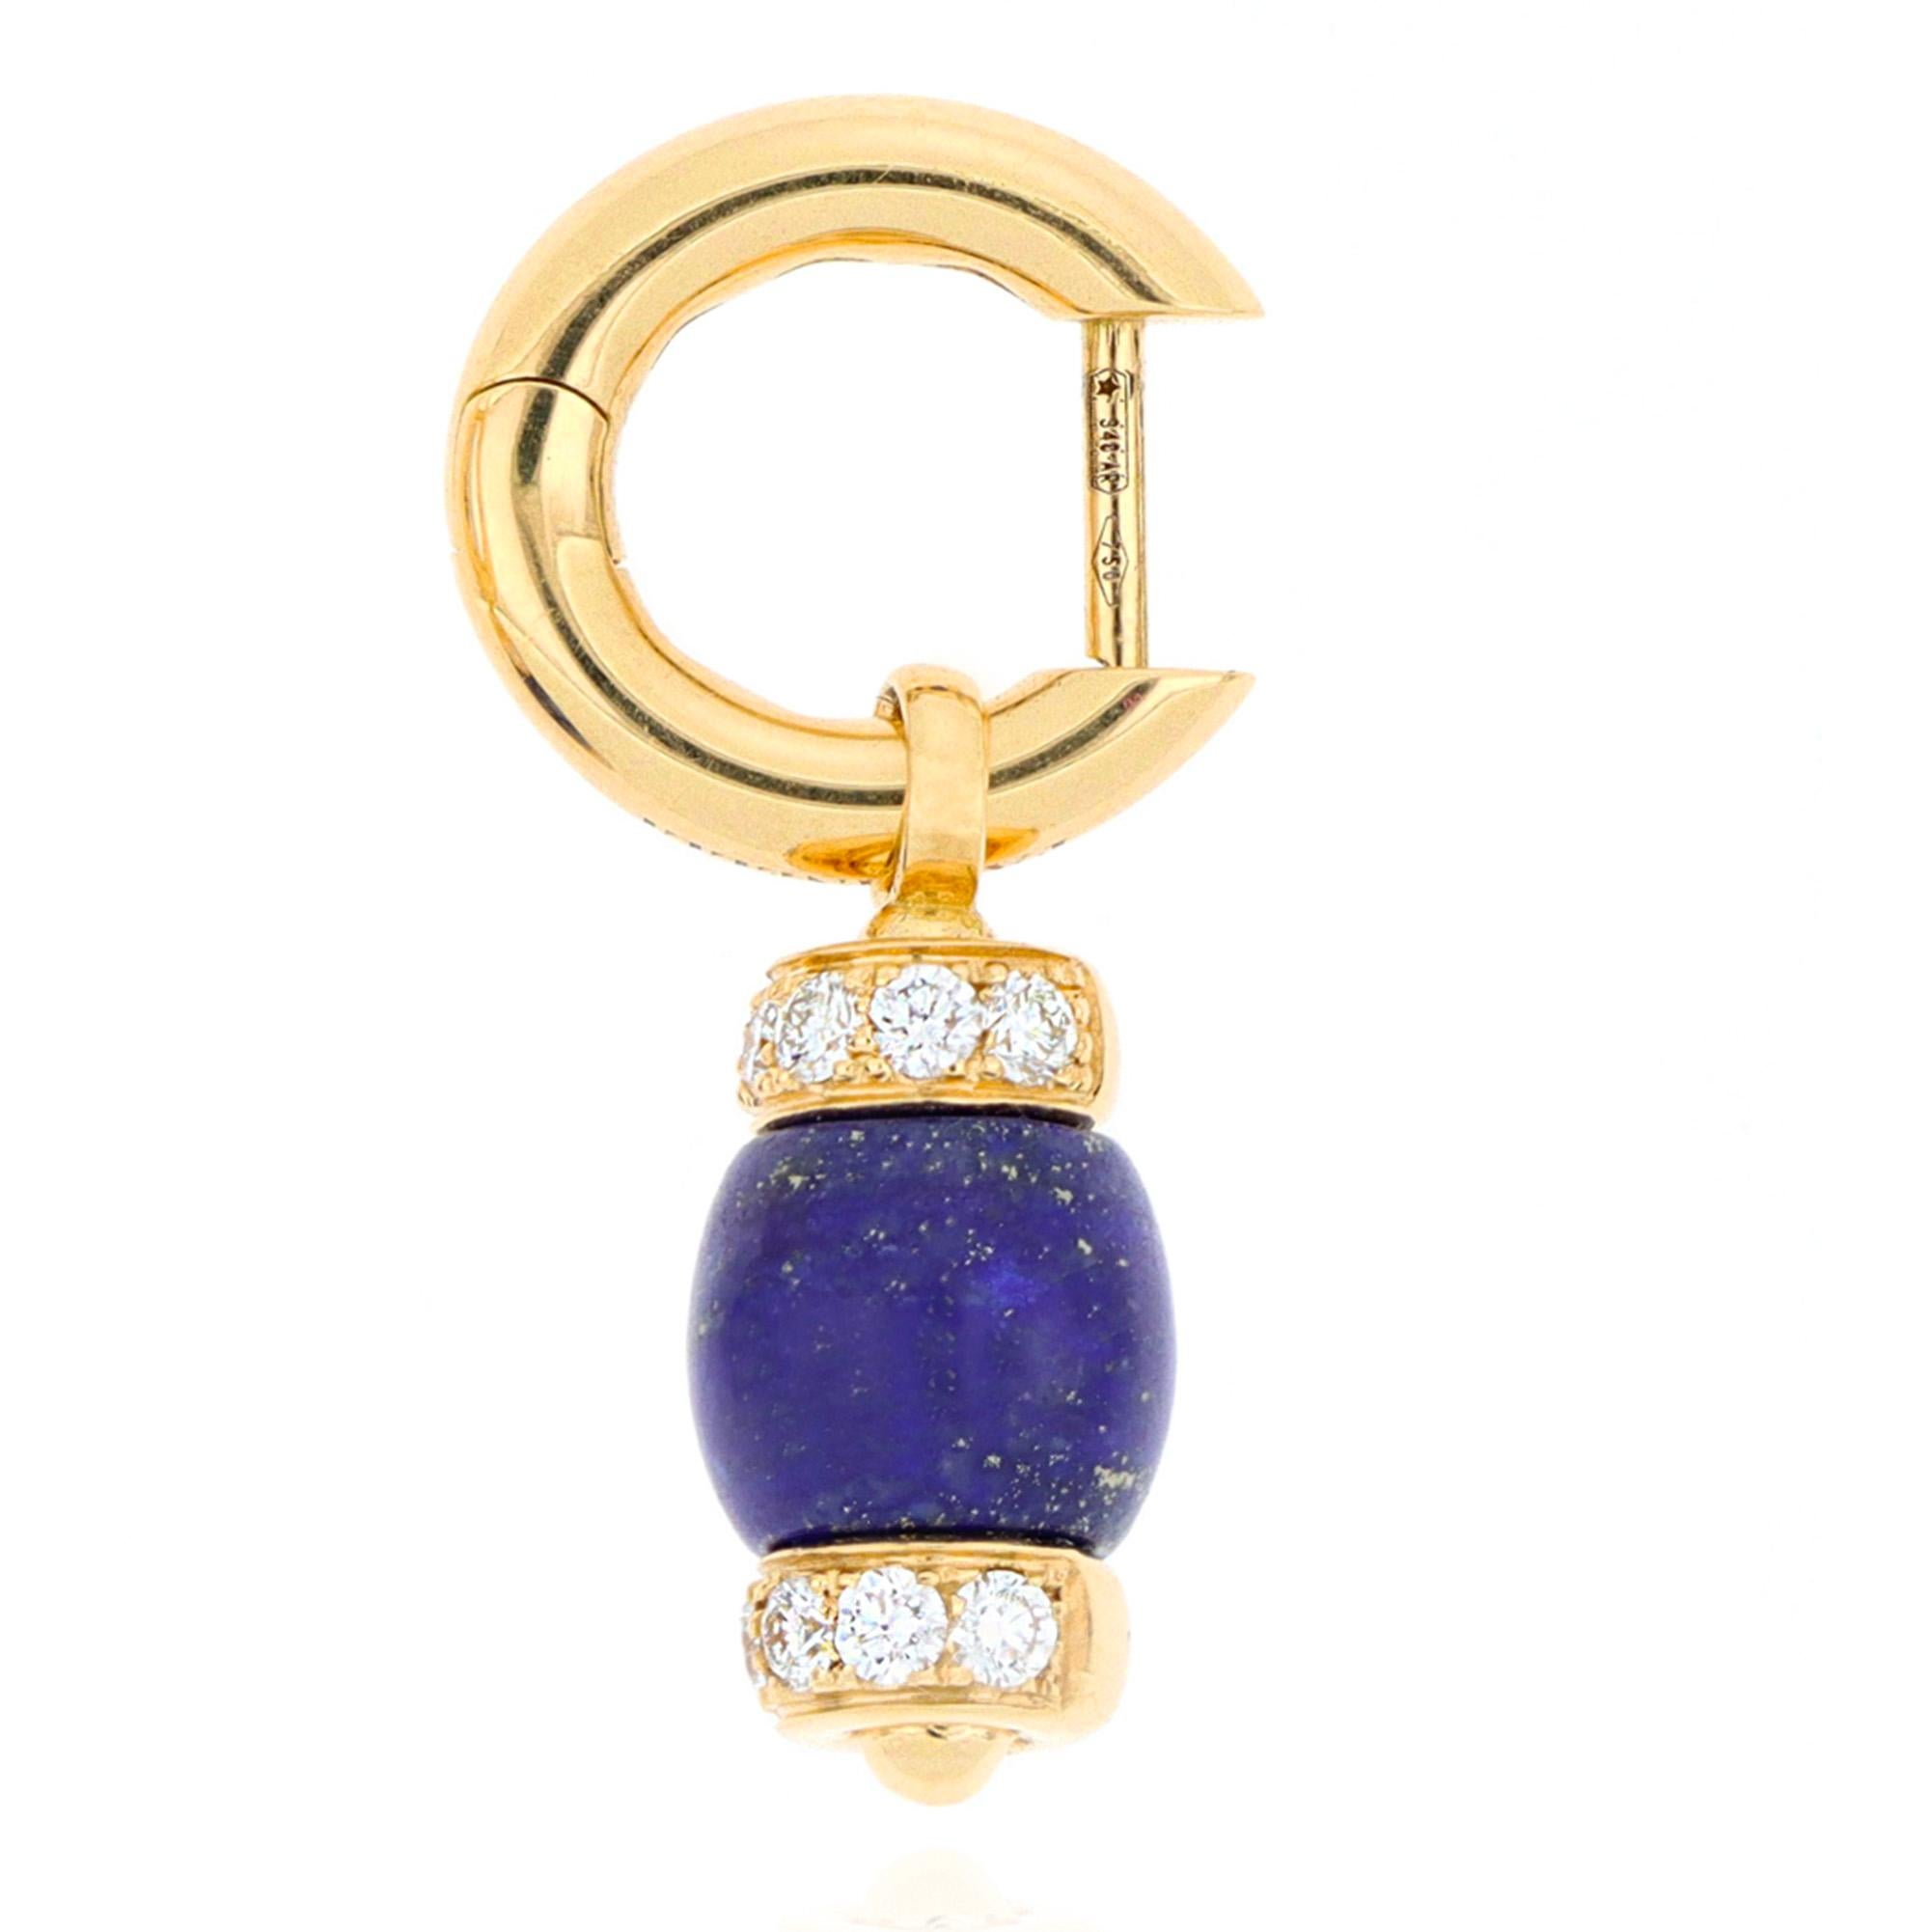 Audacity and creative flair come together in this 18-karat yellow gold earring set from Le Carrousel collection. Lapis lazuli, with its many shades of color, is ennobled by sparkling white diamonds that adorn the sides of the barrel-shaped pendant,